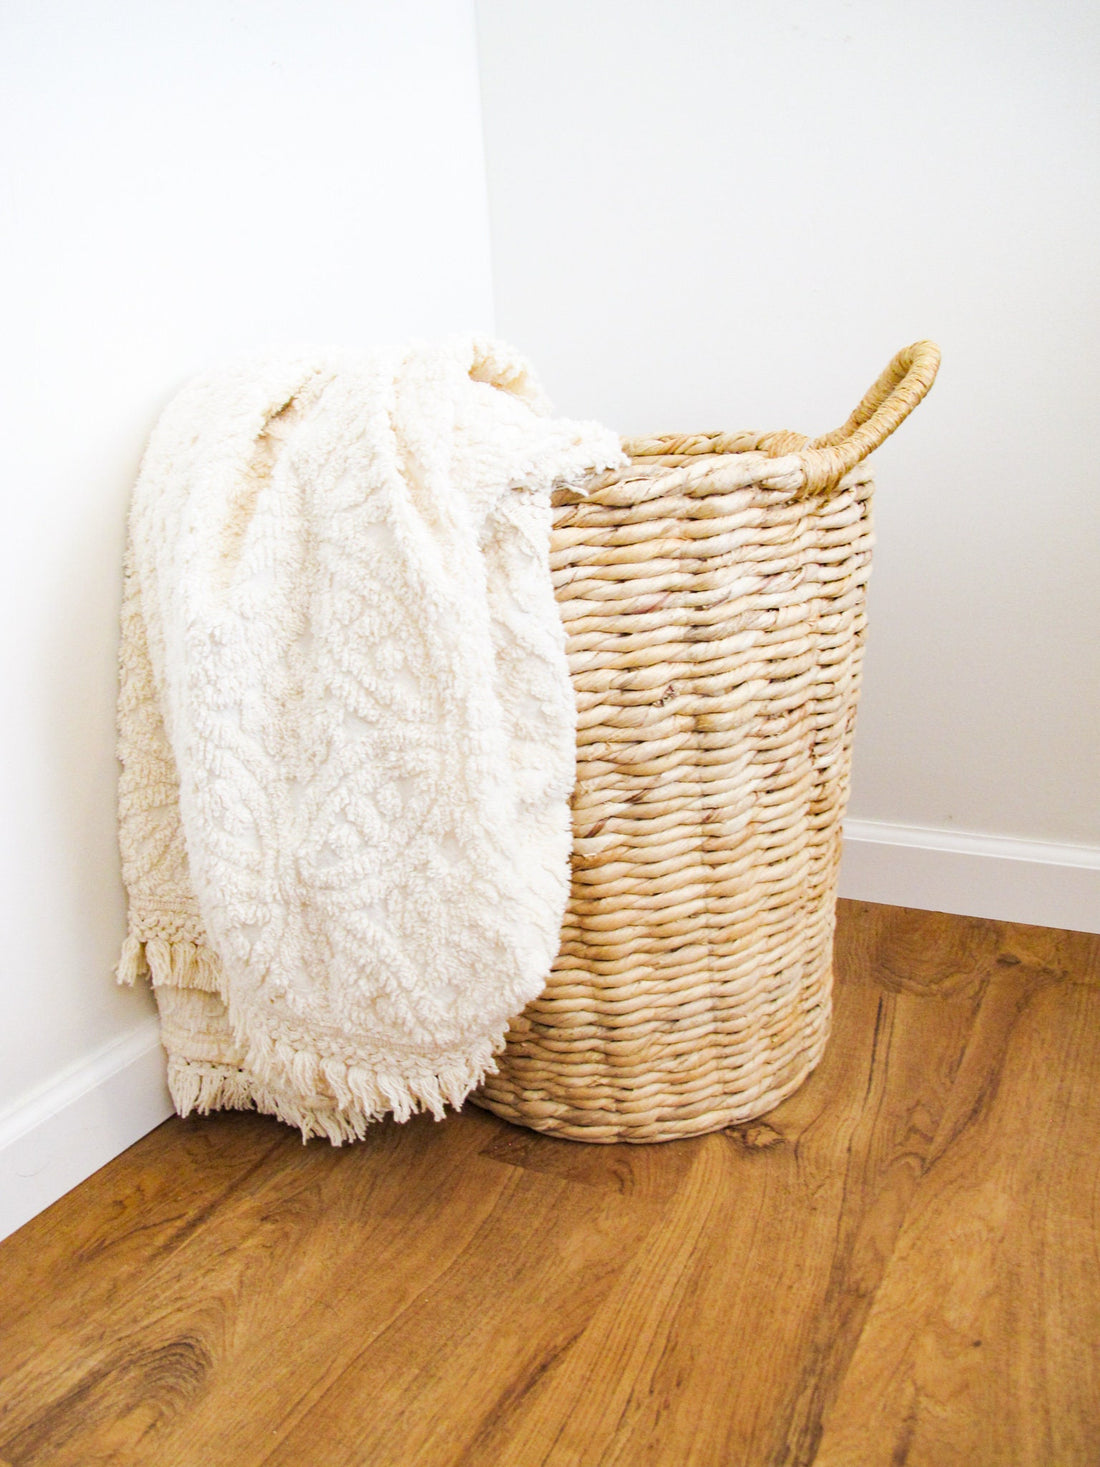 Cotton Nubby Blanket with Fringe Detail